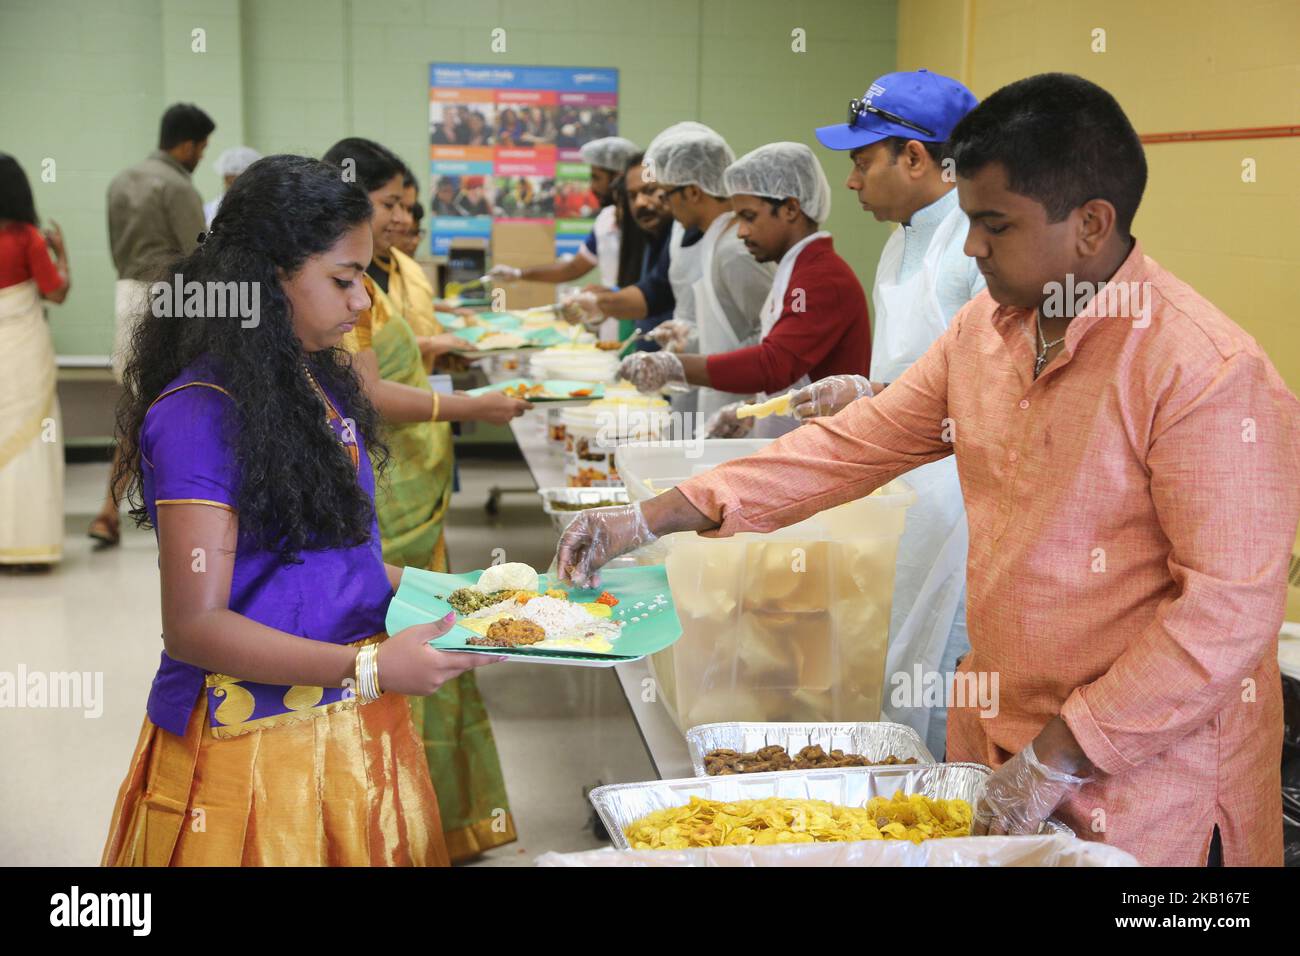 Traditional Sadhya meal is served as members of the Canadian Malayalee community held a fundraiser for the victims of the floods in Kerala, India. the fundraiser was held on September 15, 2018 in Mississauga, Ontario, Canada and hundreds came to give their support. Heavy rain in resulted in over 800,000 people being displaced and more than 373 people being killed in what has been called the worst flooding in Kerala in nearly a century. All 14 districts of the state were placed on high alert and thirty-five out of the forty-two dams within the state were opened for the first time in history. (P Stock Photo